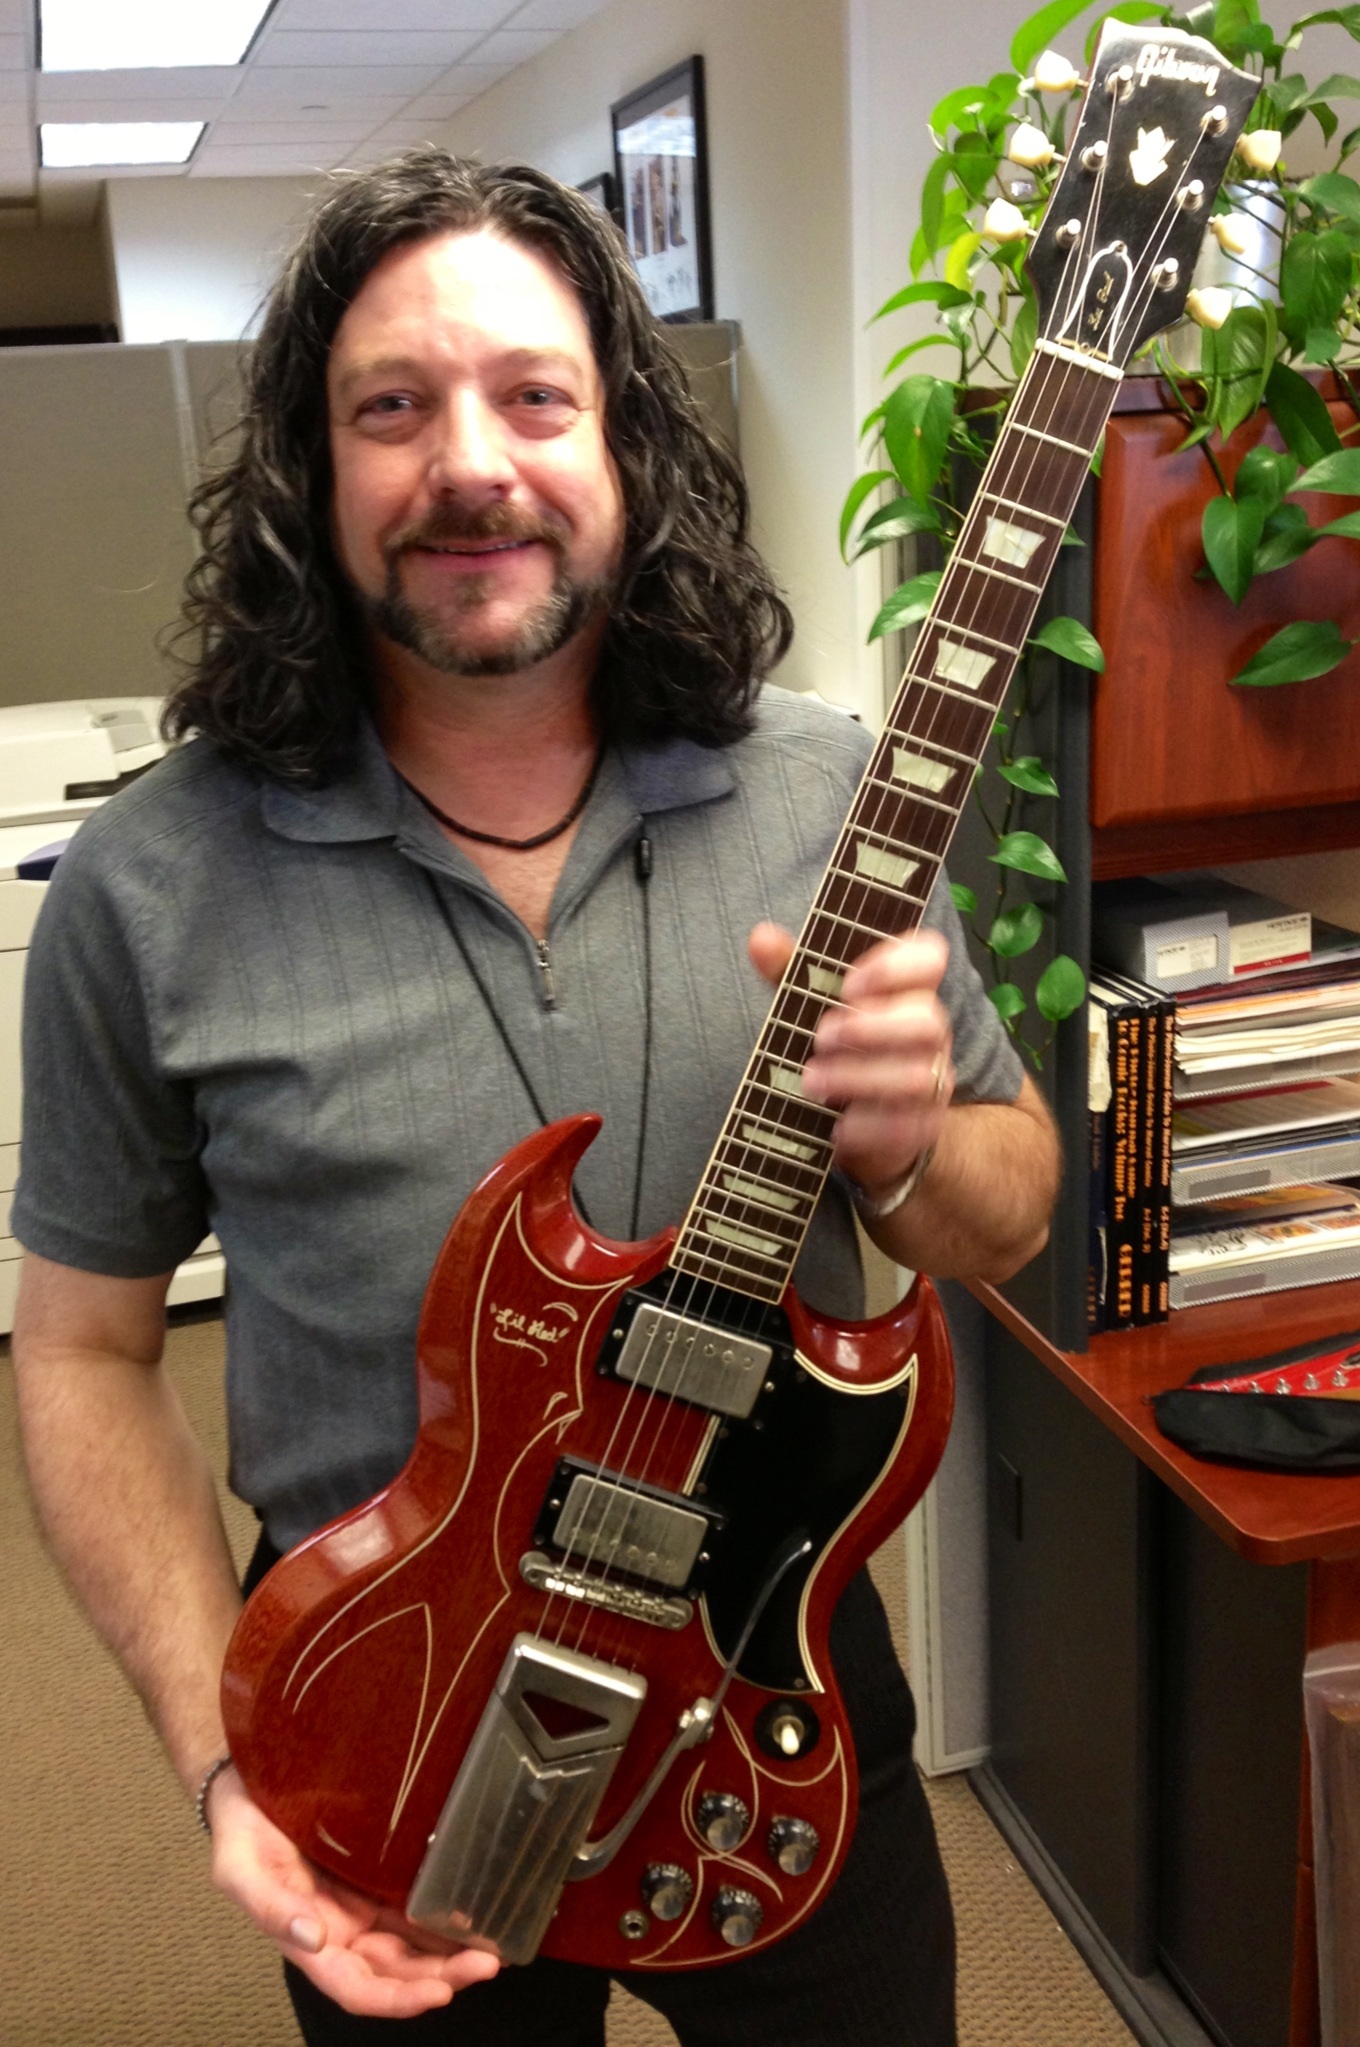 Greg with Billy Gibbons' Gibson SG guitar.